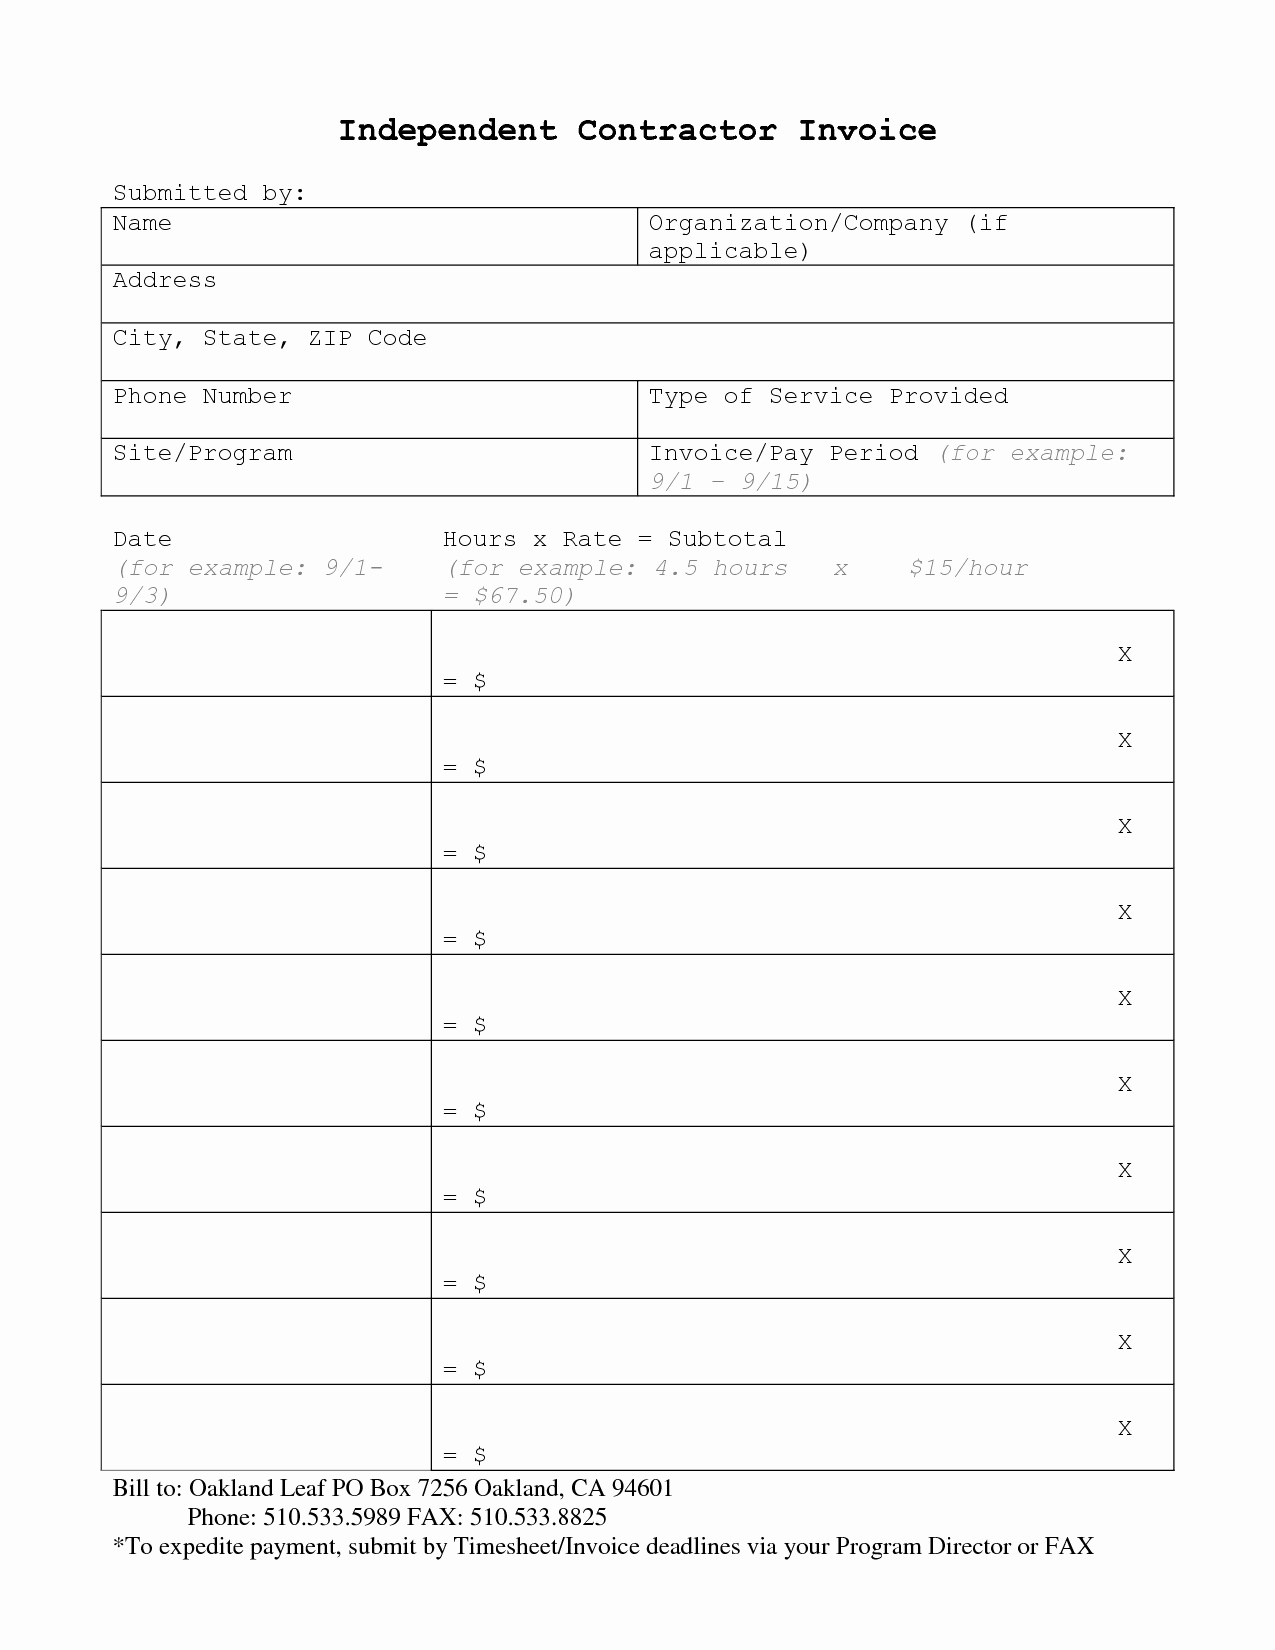 Independent Contractor Invoice Template New Independent Contractor Invoice Template